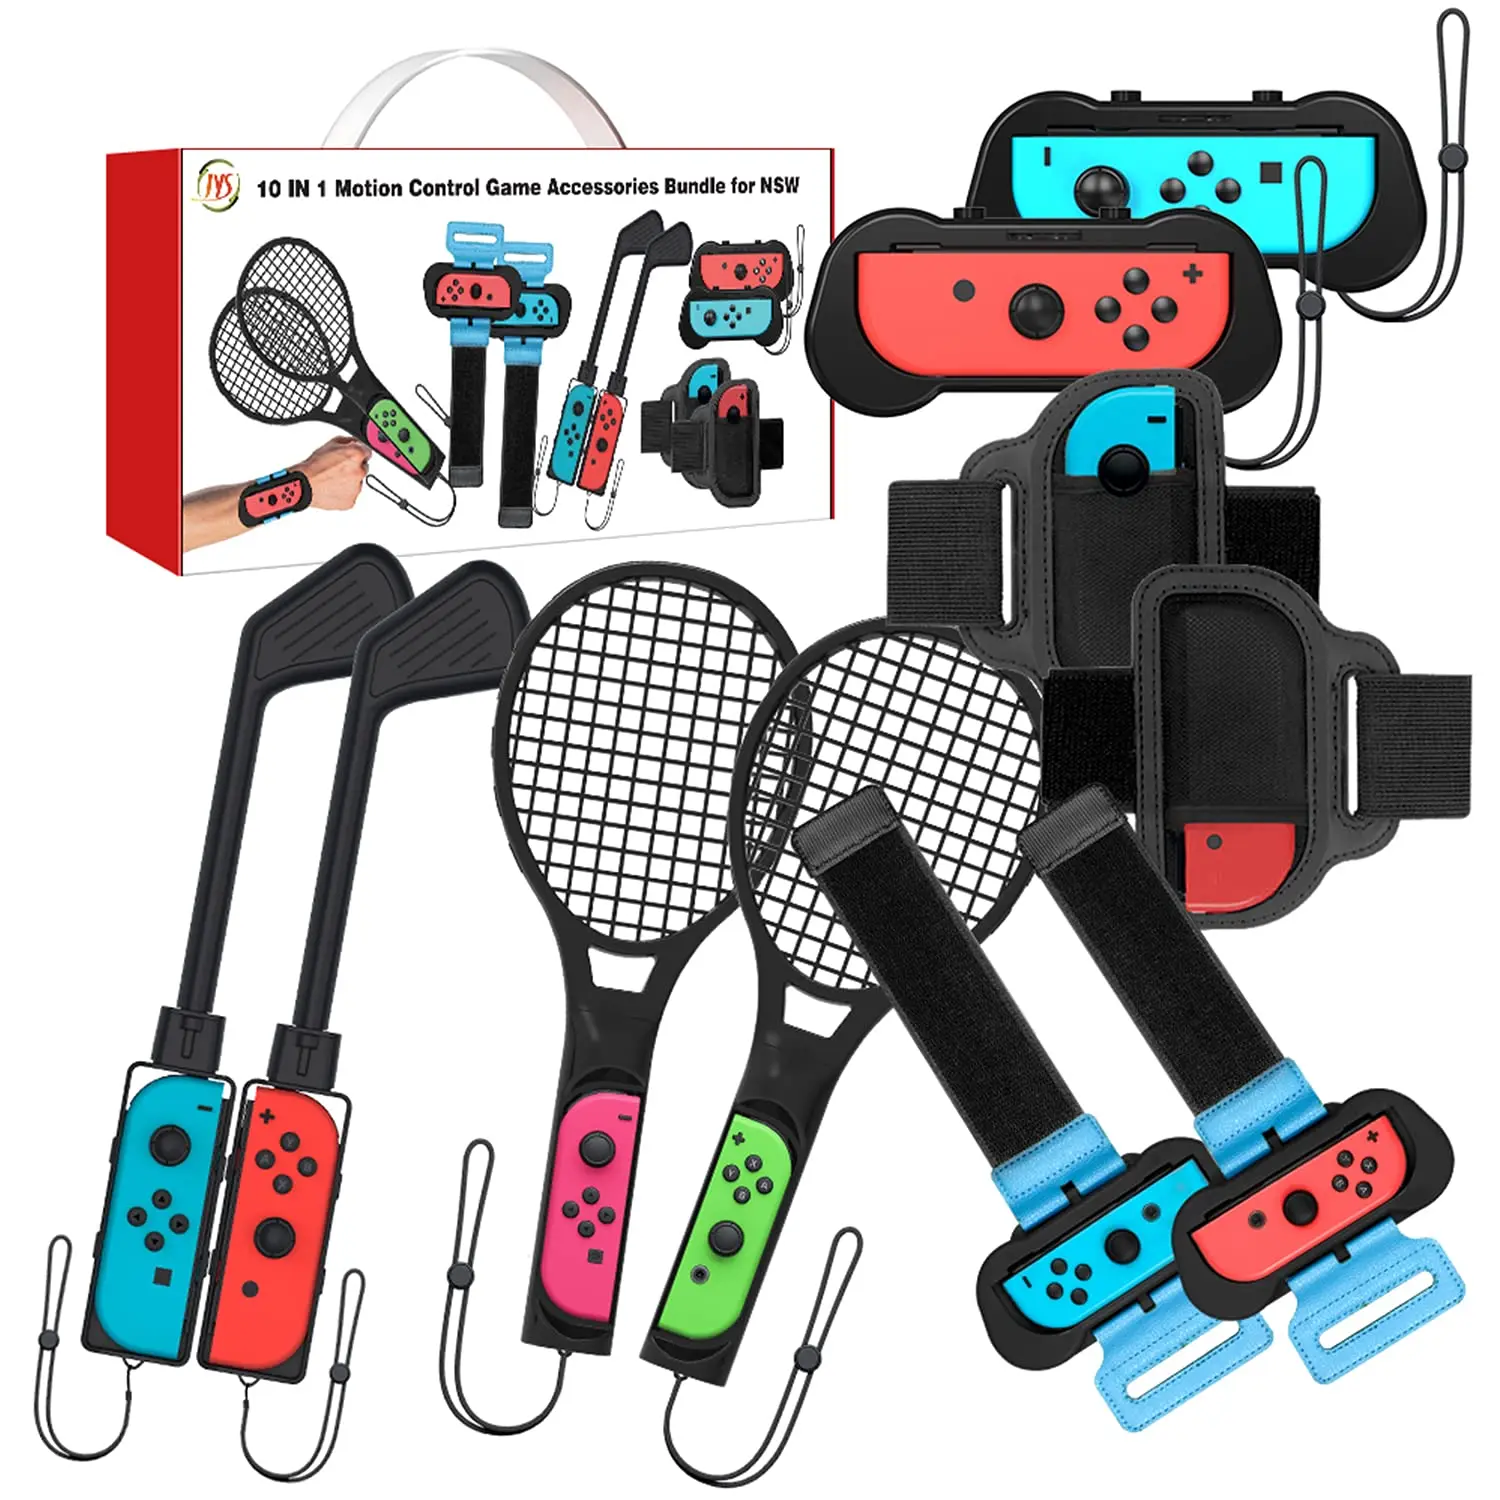 2022 Switch Sports for Leg Nintendo Kit Accessories Bands Strap Wrist Switch in 10 Grip 1 Dance & Golf Joycon Case OLED Grip 